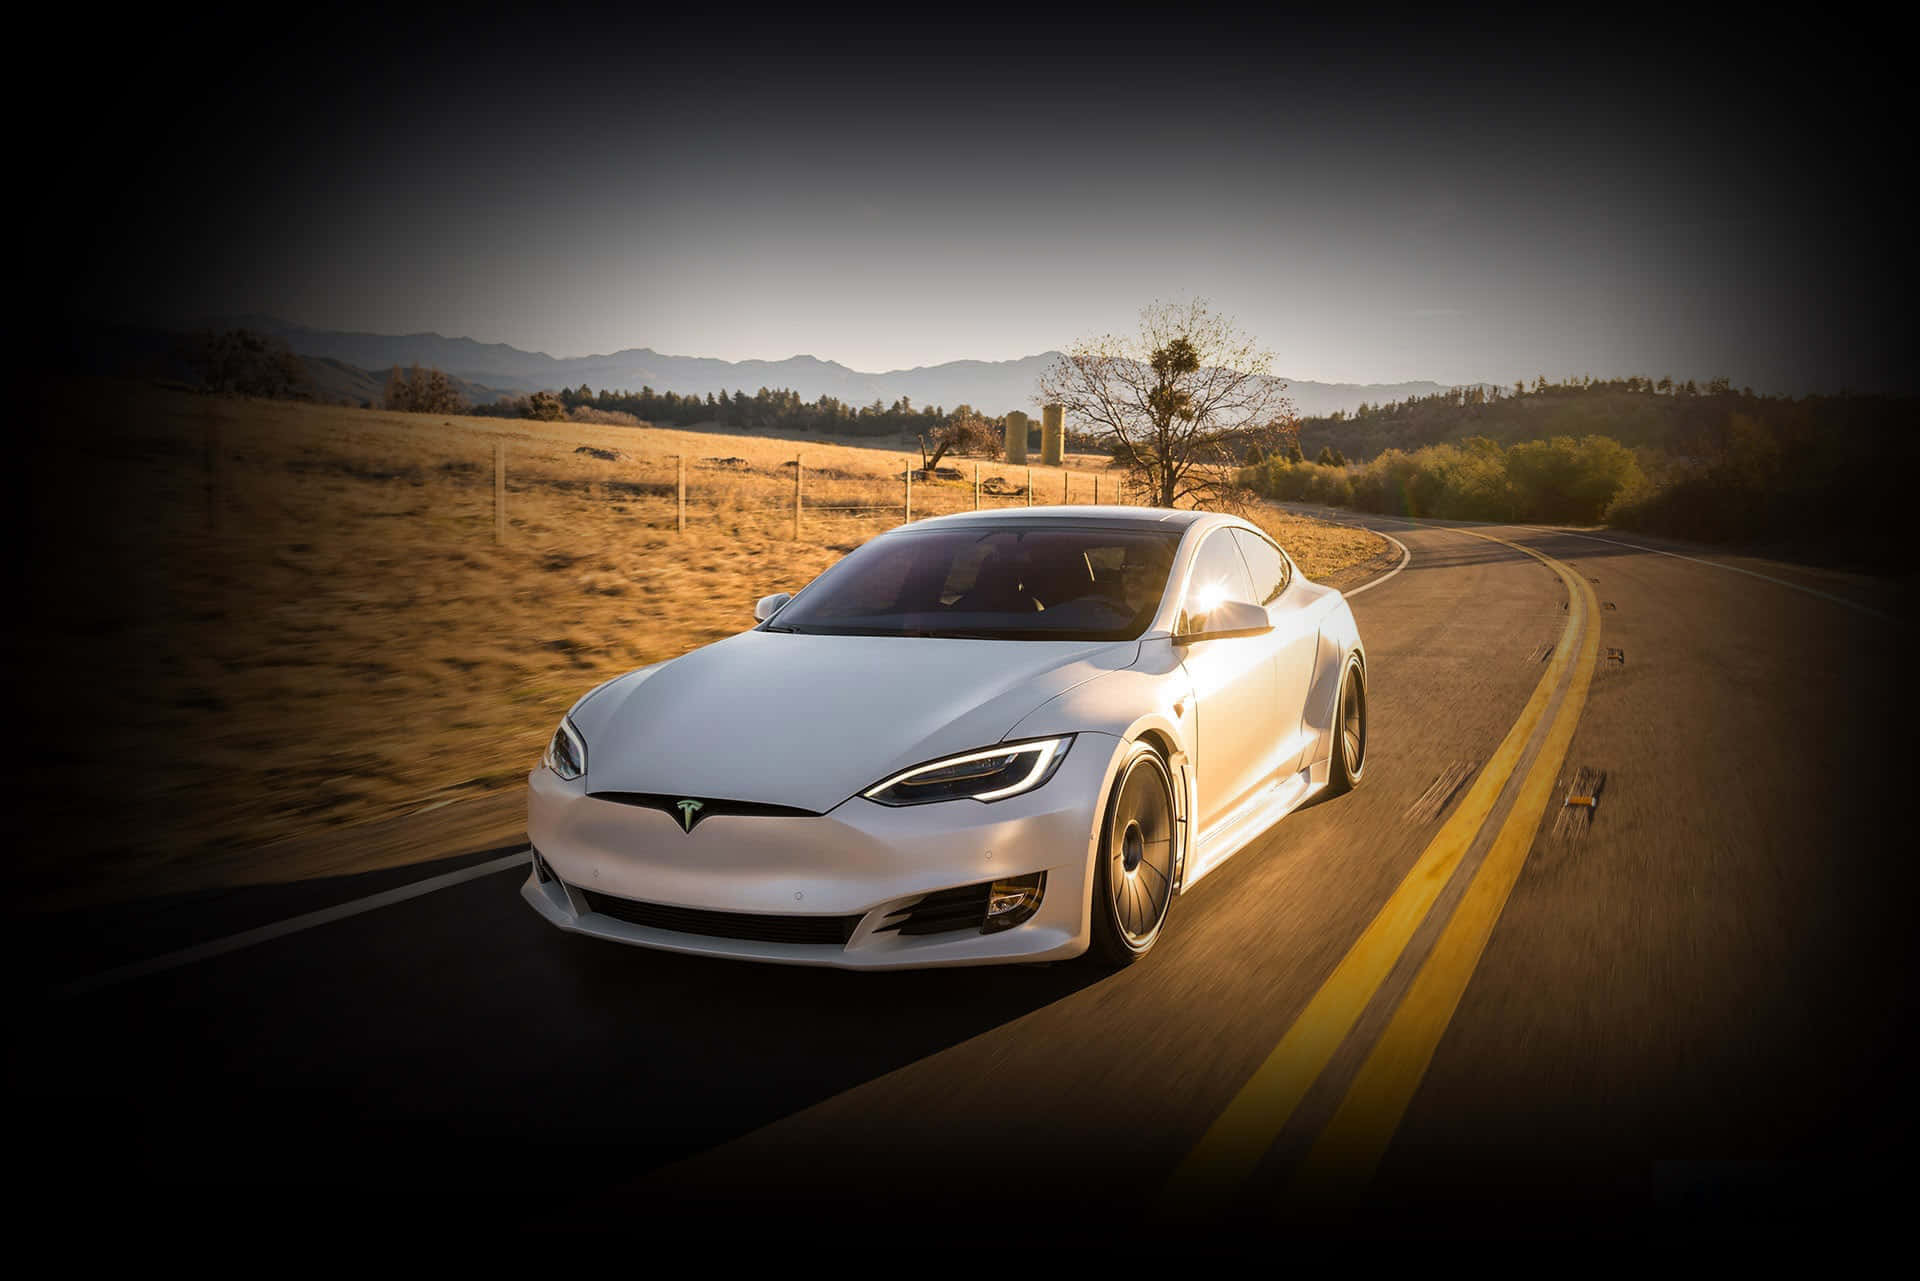 Tesla's electric cars are setting the new standard for eco-friendly transportation.